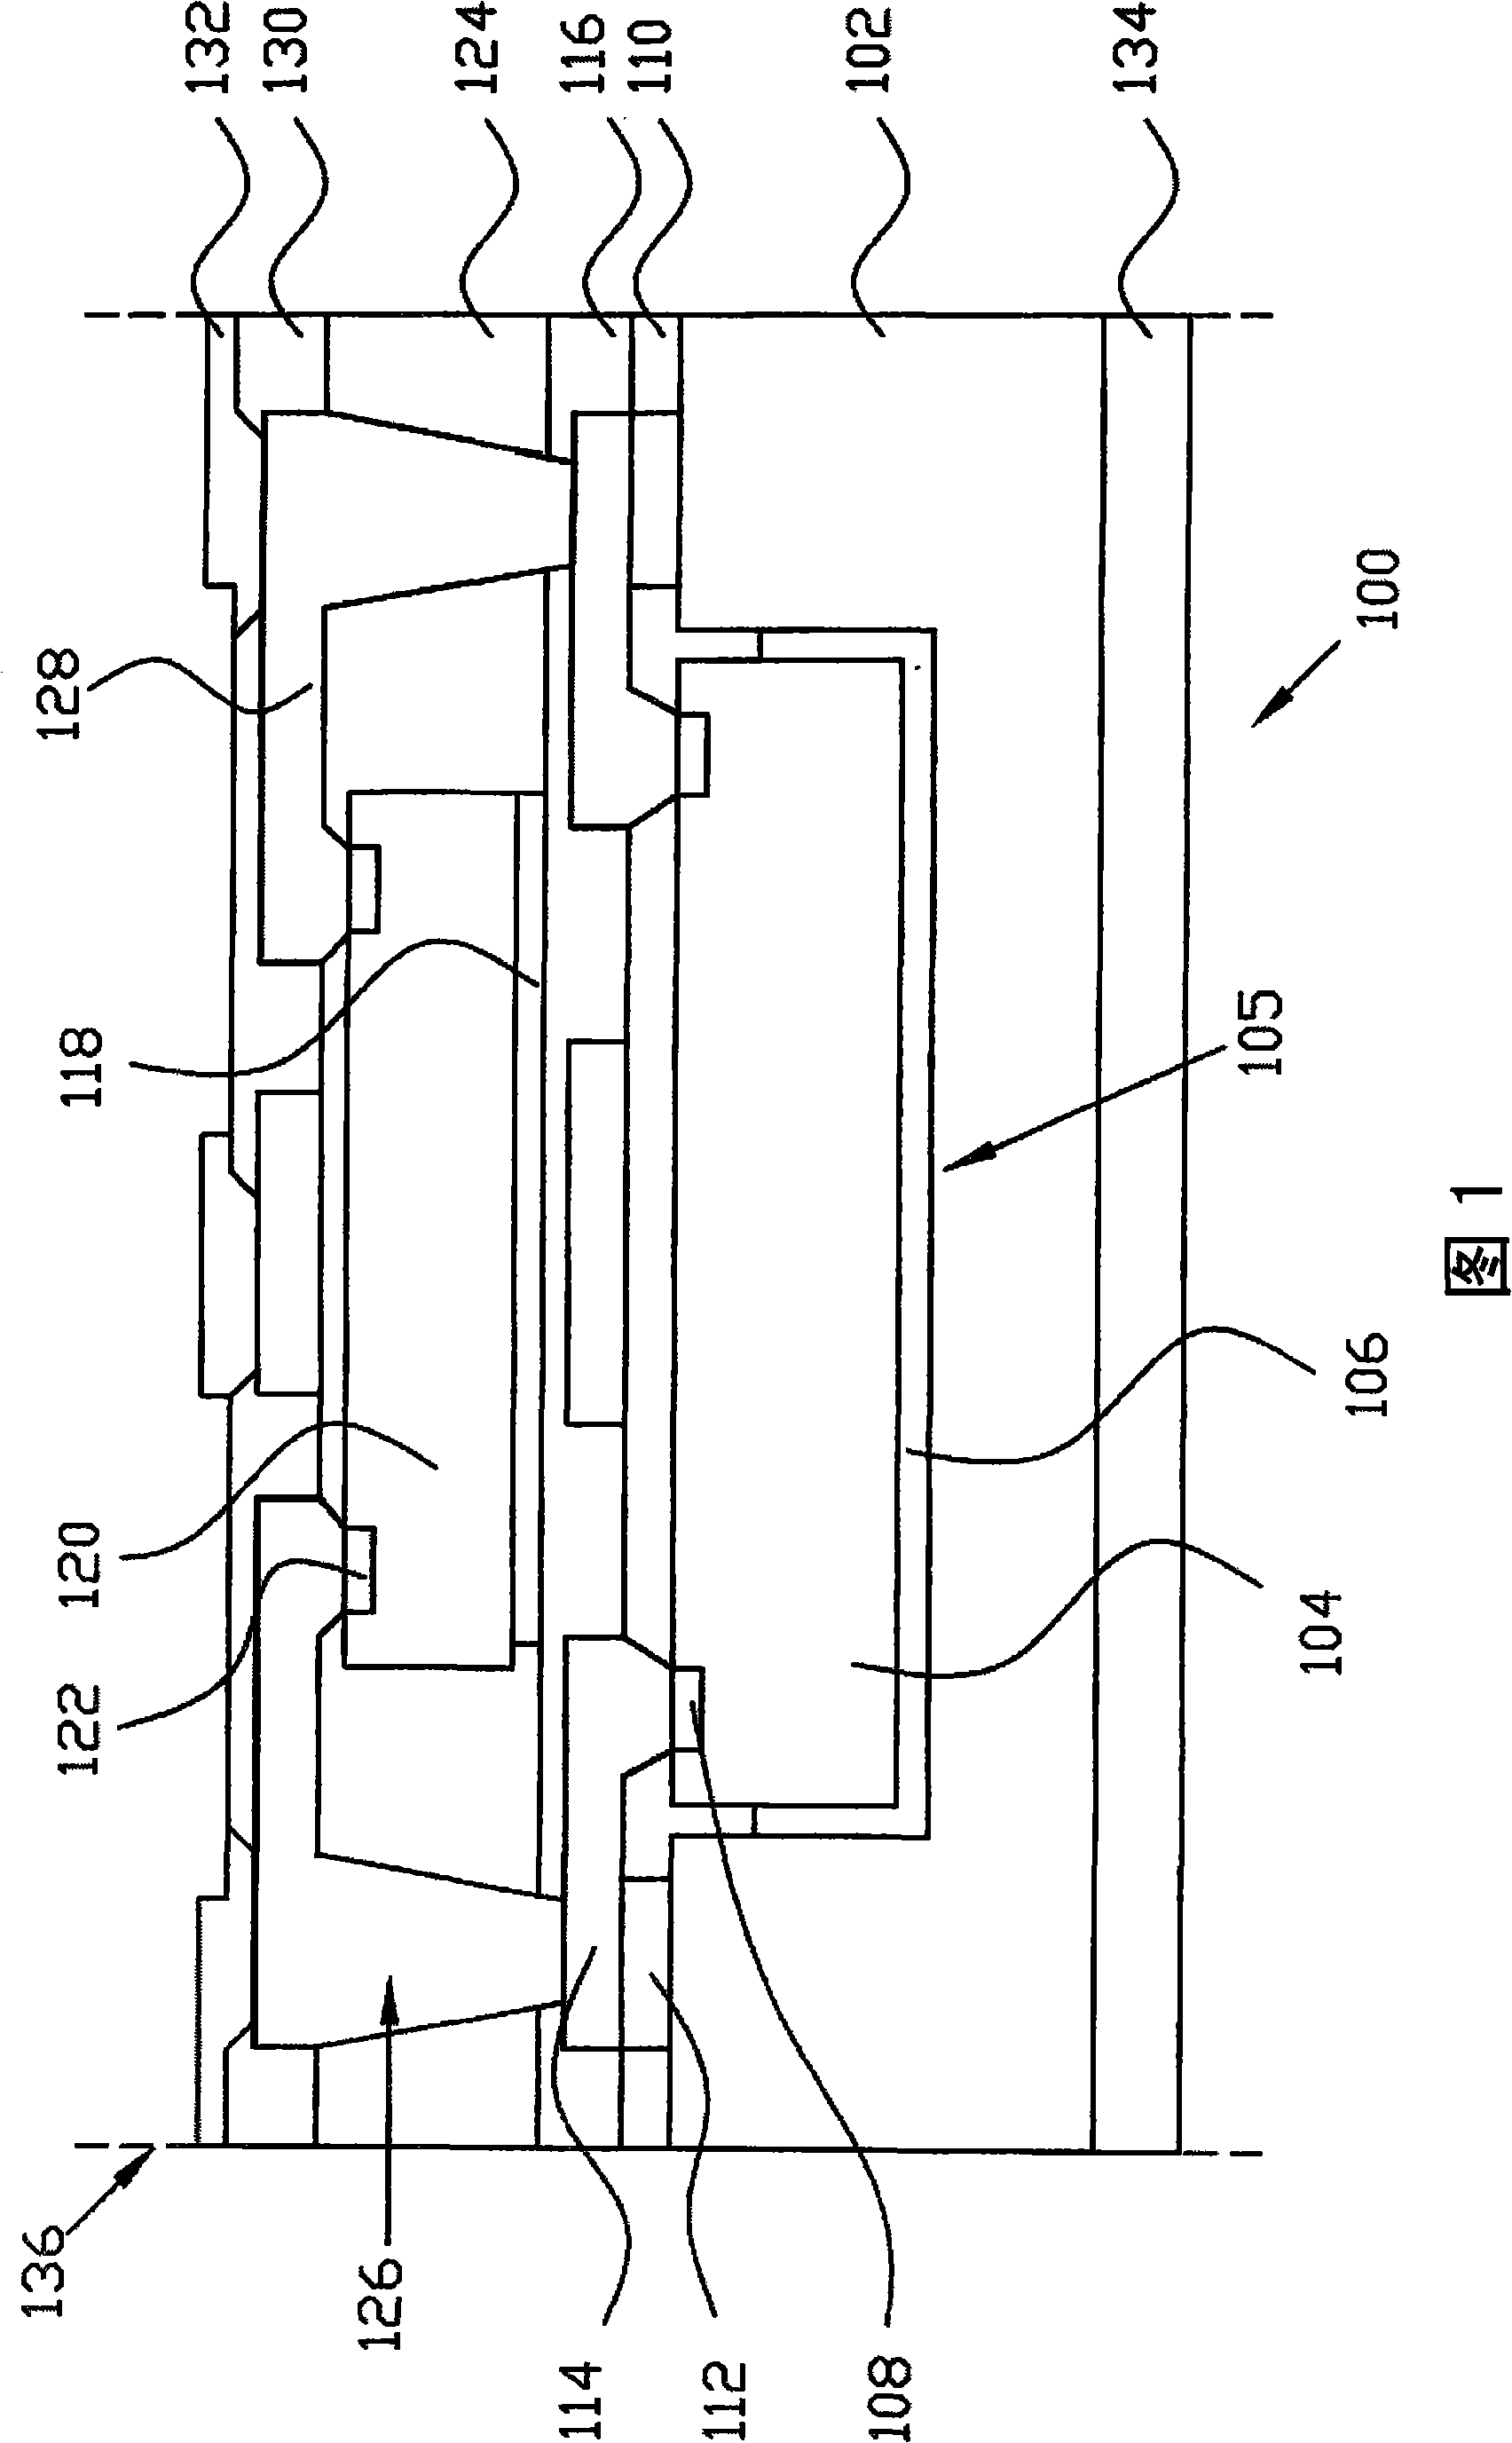 Structure of semiconductor device package and the method of the same